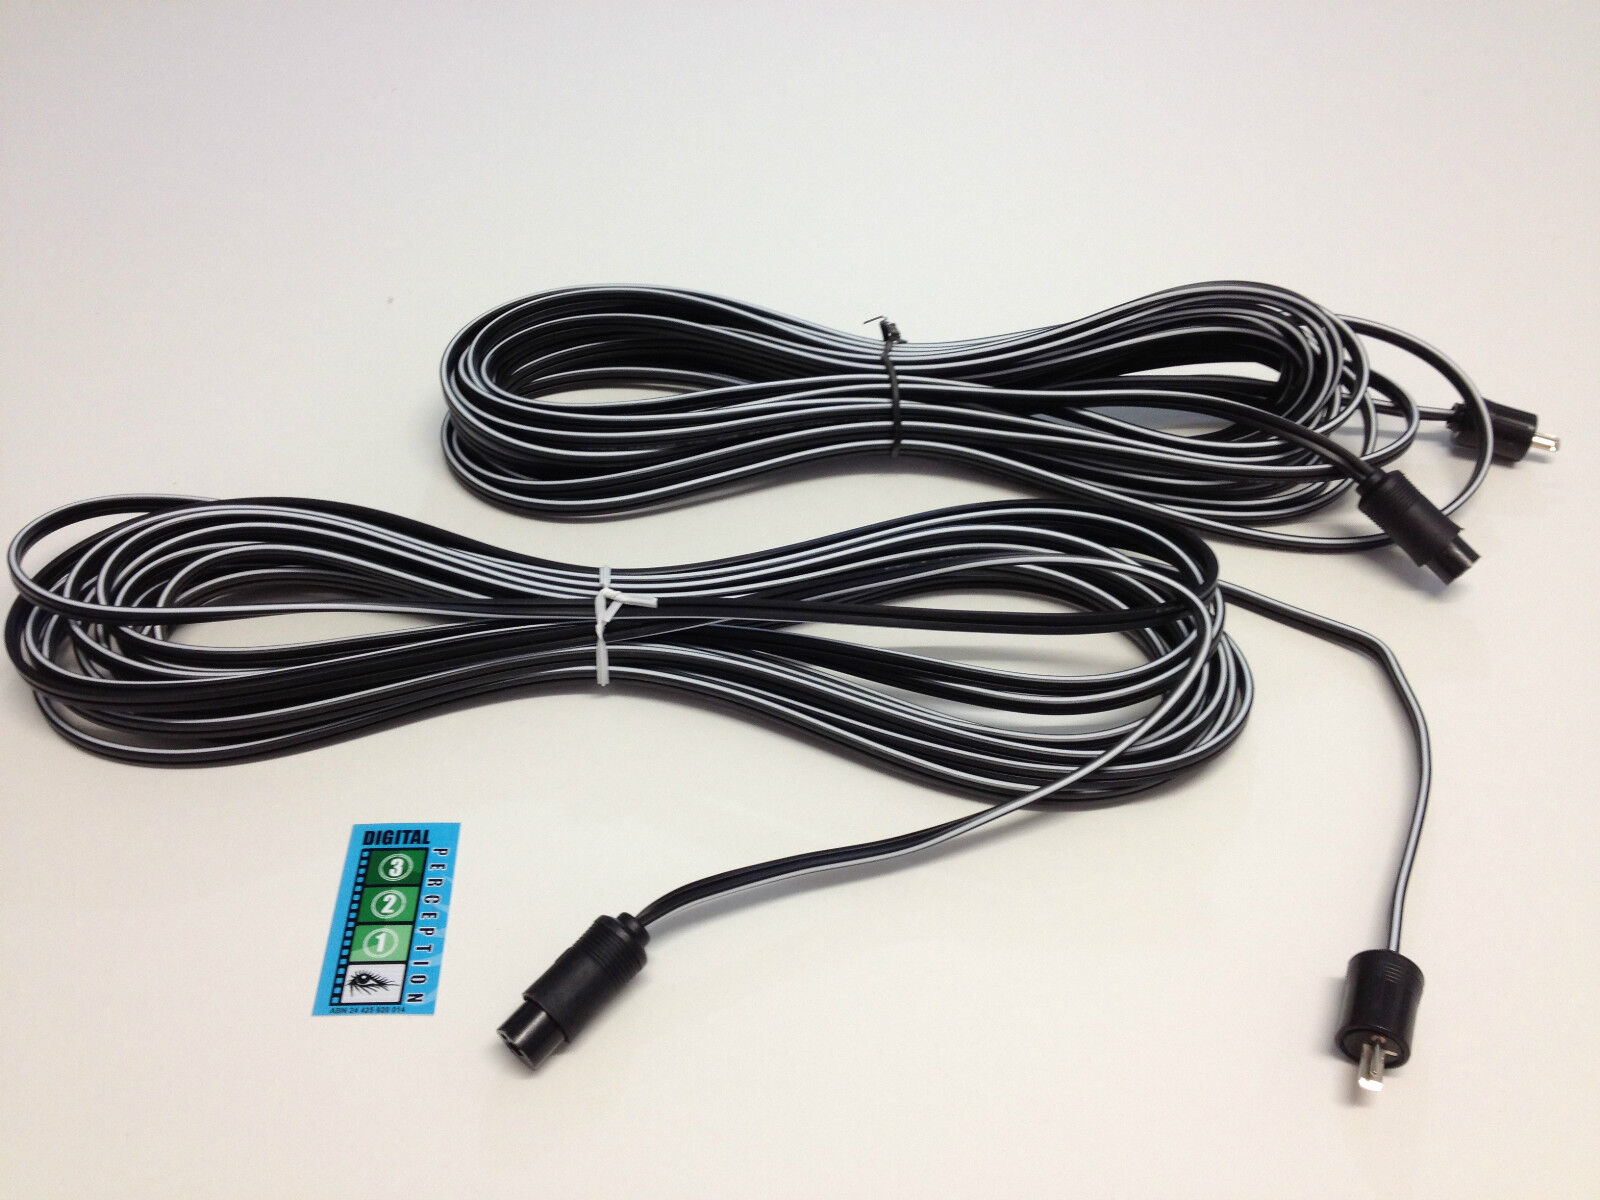 Speaker cables for Bang & Olufsen - PAIR  are 6 meters 2 pin din -  New - $22.95